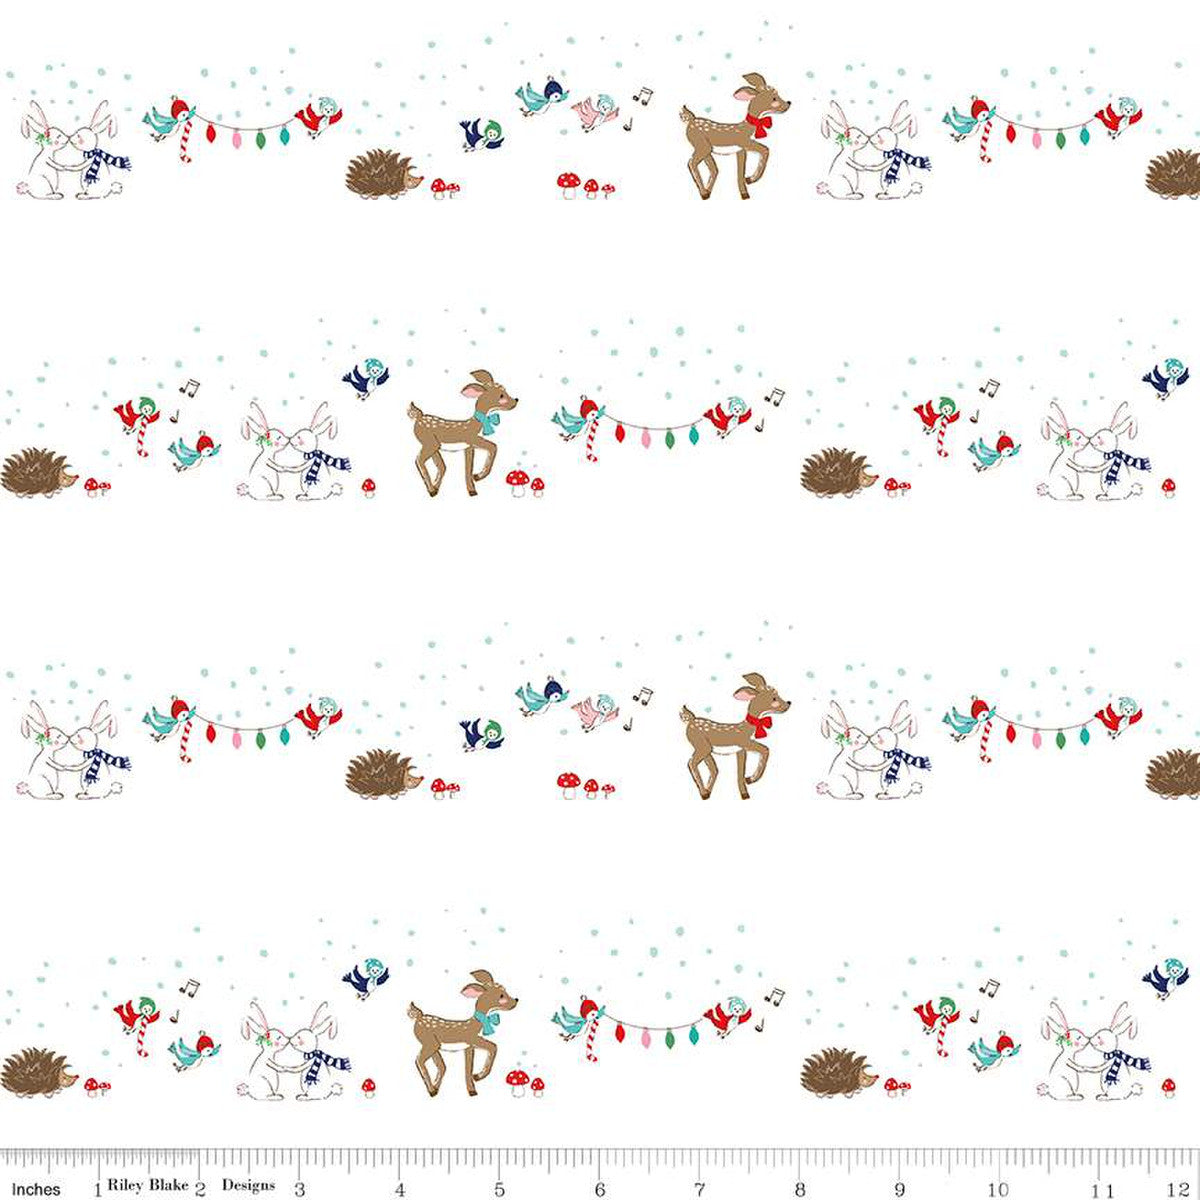 Manufacturer: Riley Blake Designs Designer: Tasha Noel Collection: Pixie Noel 2 Print Name: Animals in White Material: 100% Cotton  Weight: Quilting  SKU: C12111-WHITE Width: 44 inches